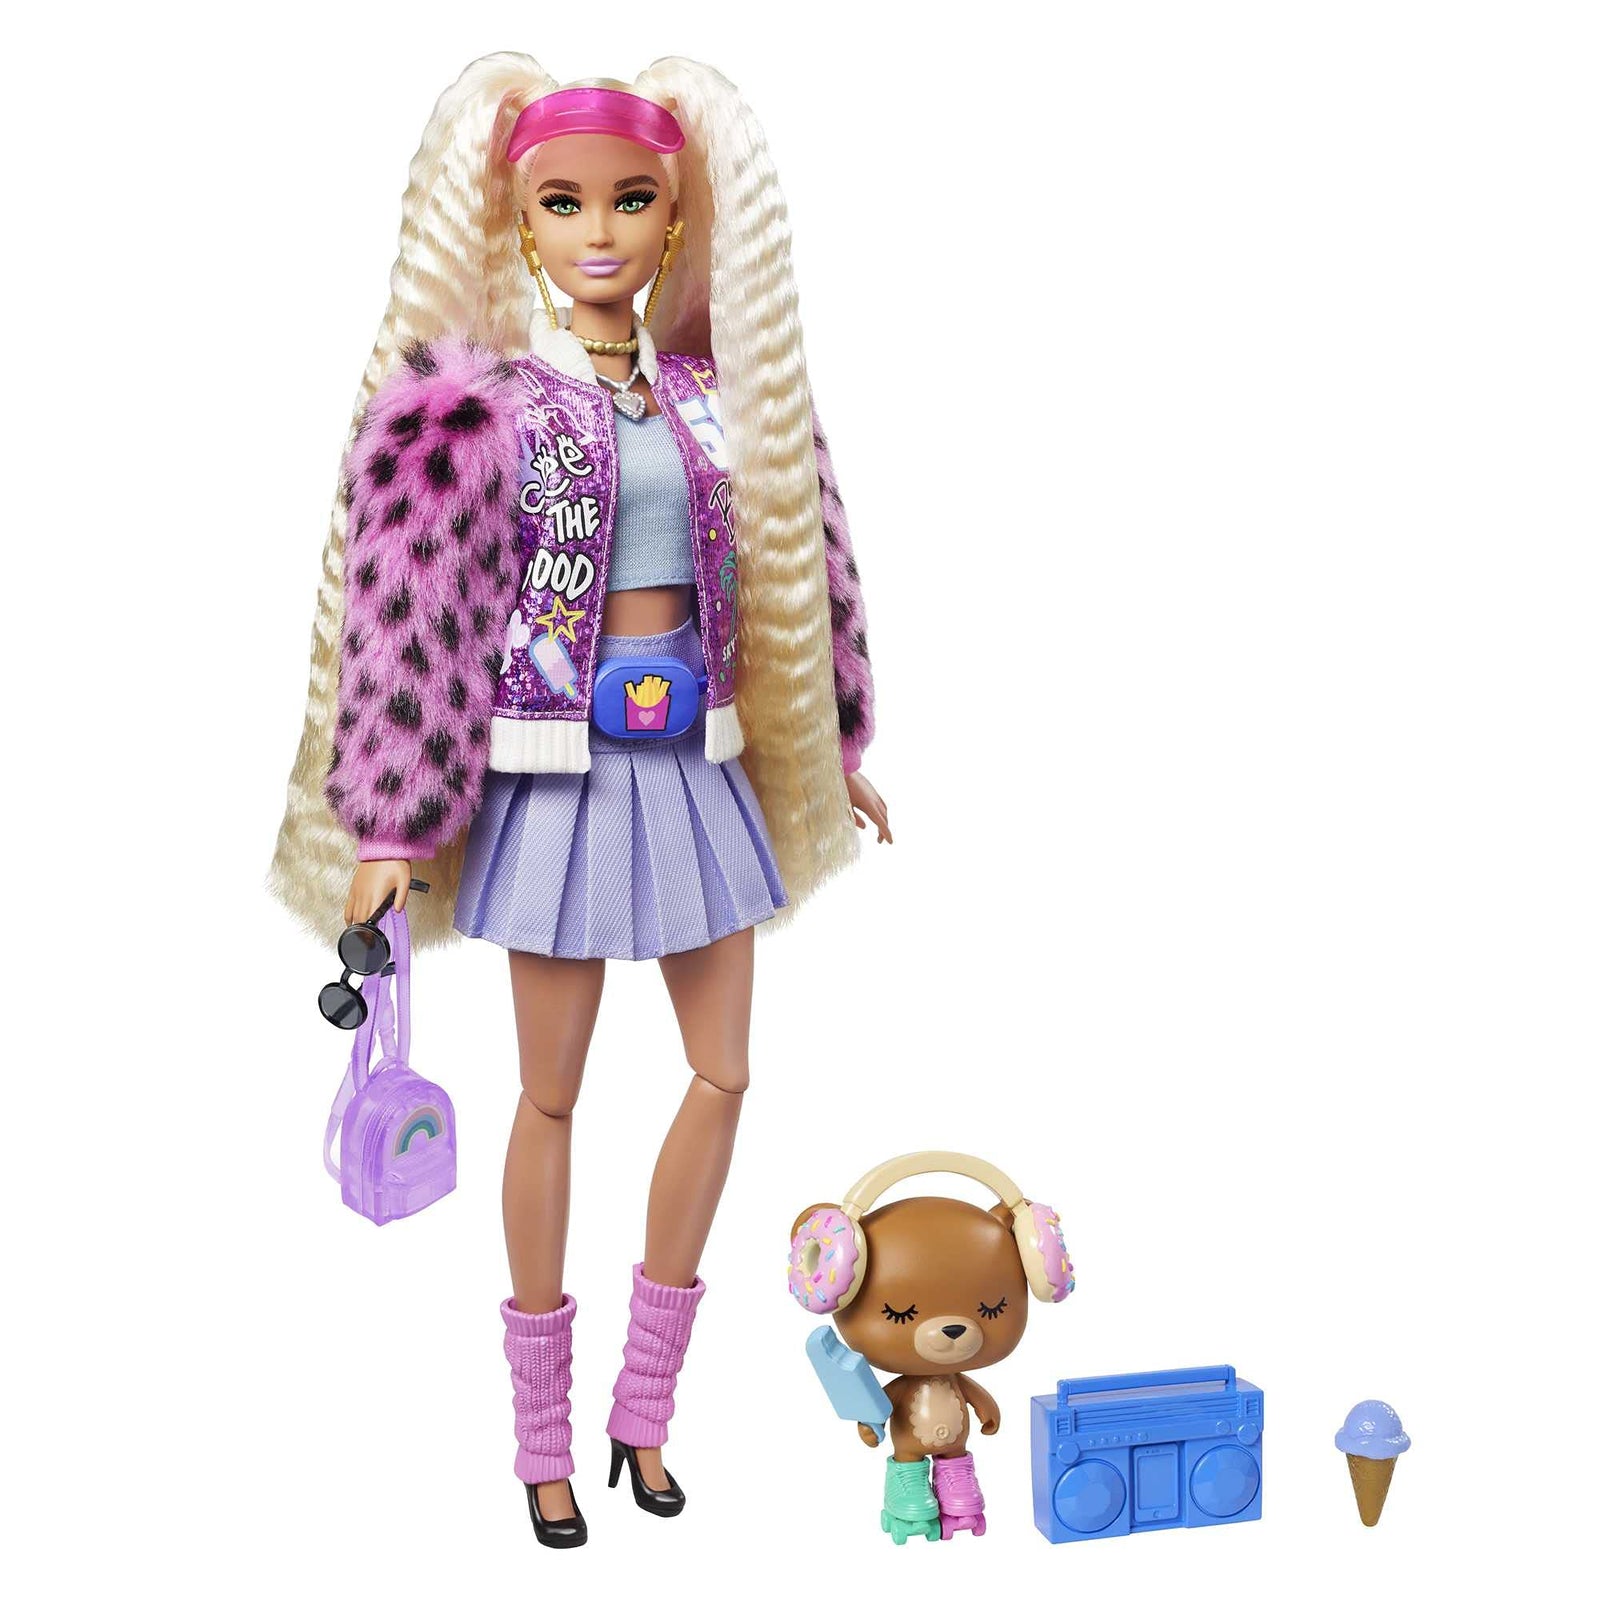 Barbie Extra Doll #8 in Pink Sparkly Varsity Jacket with Furry Arms & Pet Teddy Bear, Extra-Long Crimped Pigtails, Layered Outfit & Accessories, Multiple Flexible Joints